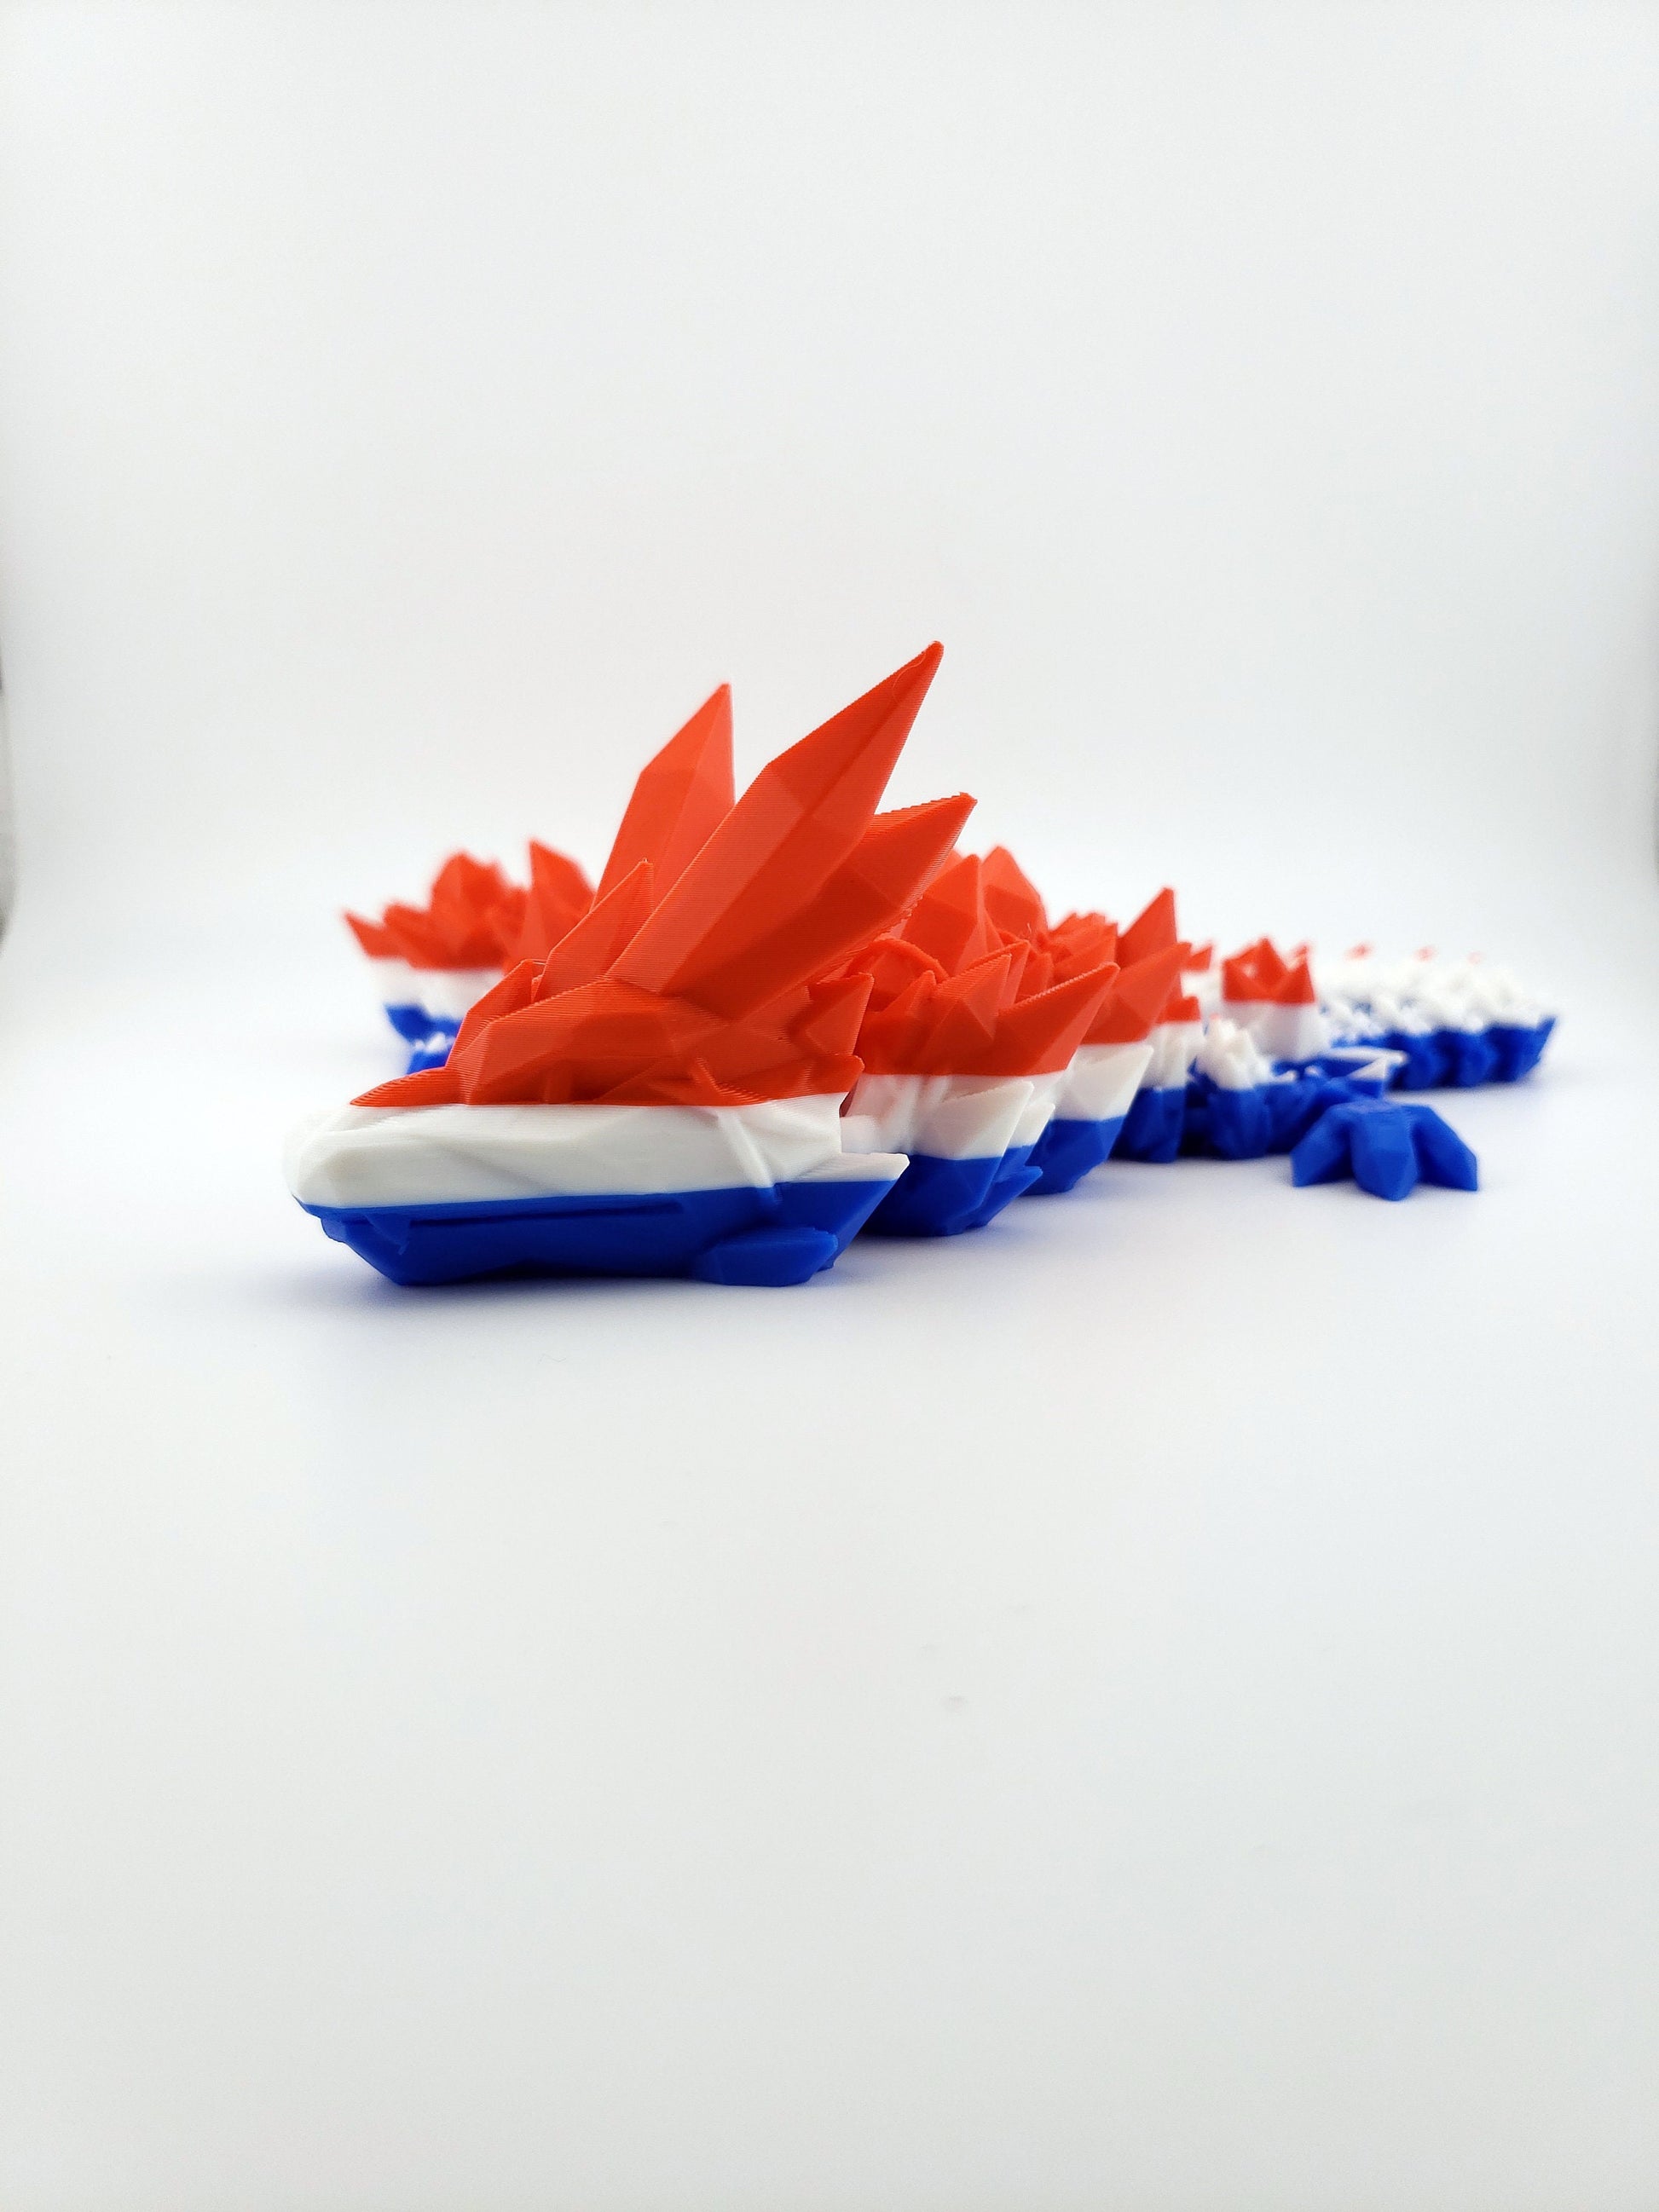 24 Inch Articulated American Flag Crystal Dragon - Sensory Toy - Unique Gift - Stress - Fidget - Patriot 4th Of July - Red, White and Blue